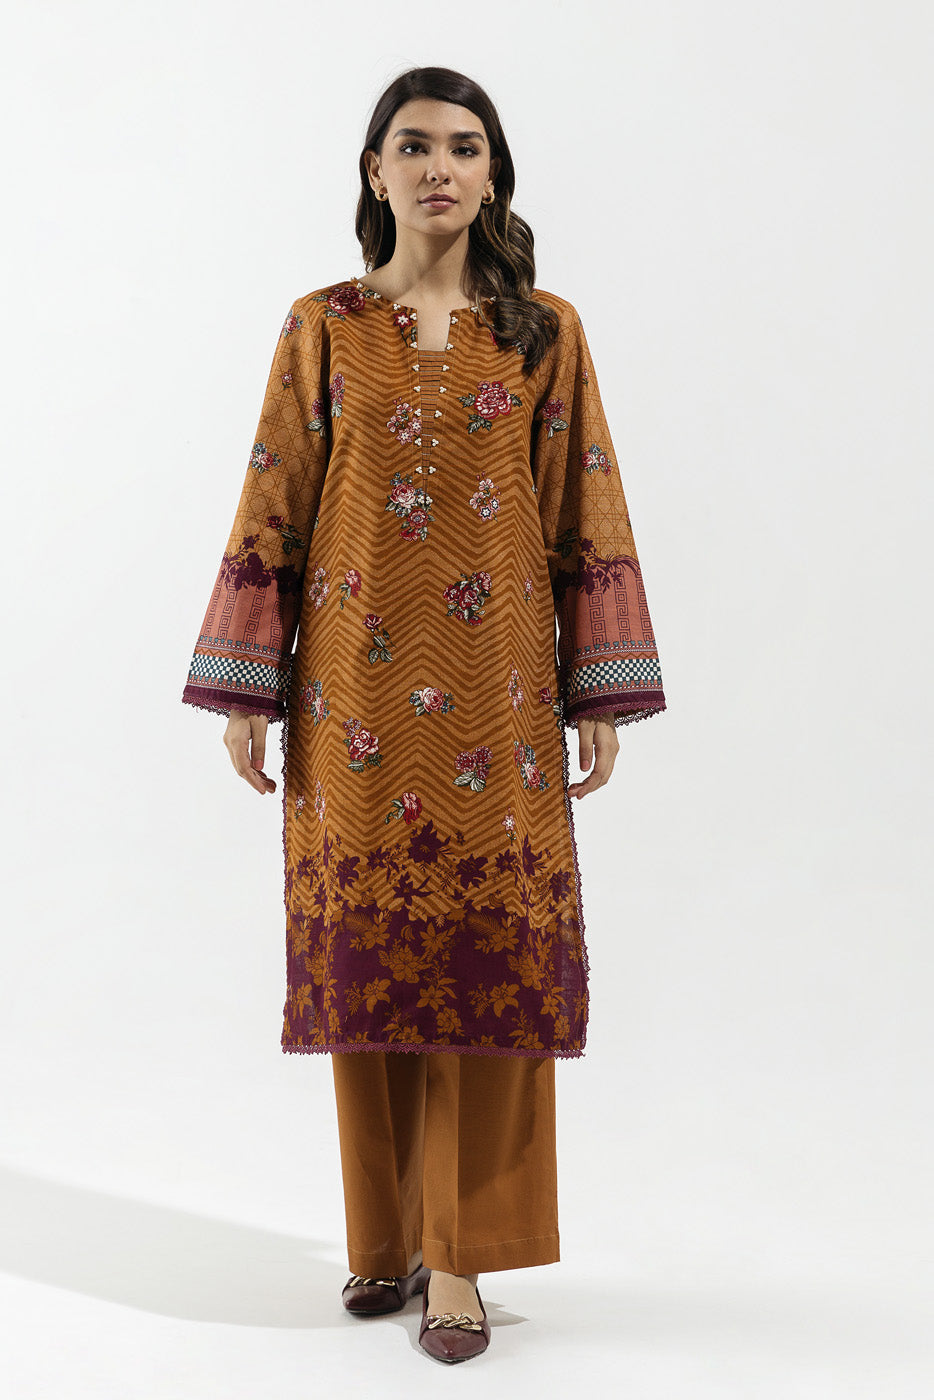 2 PIECE - PRINTED KHADDAR SUIT - RUSTIC CHINTZ (UNSTITCHED) - BEECHTREE